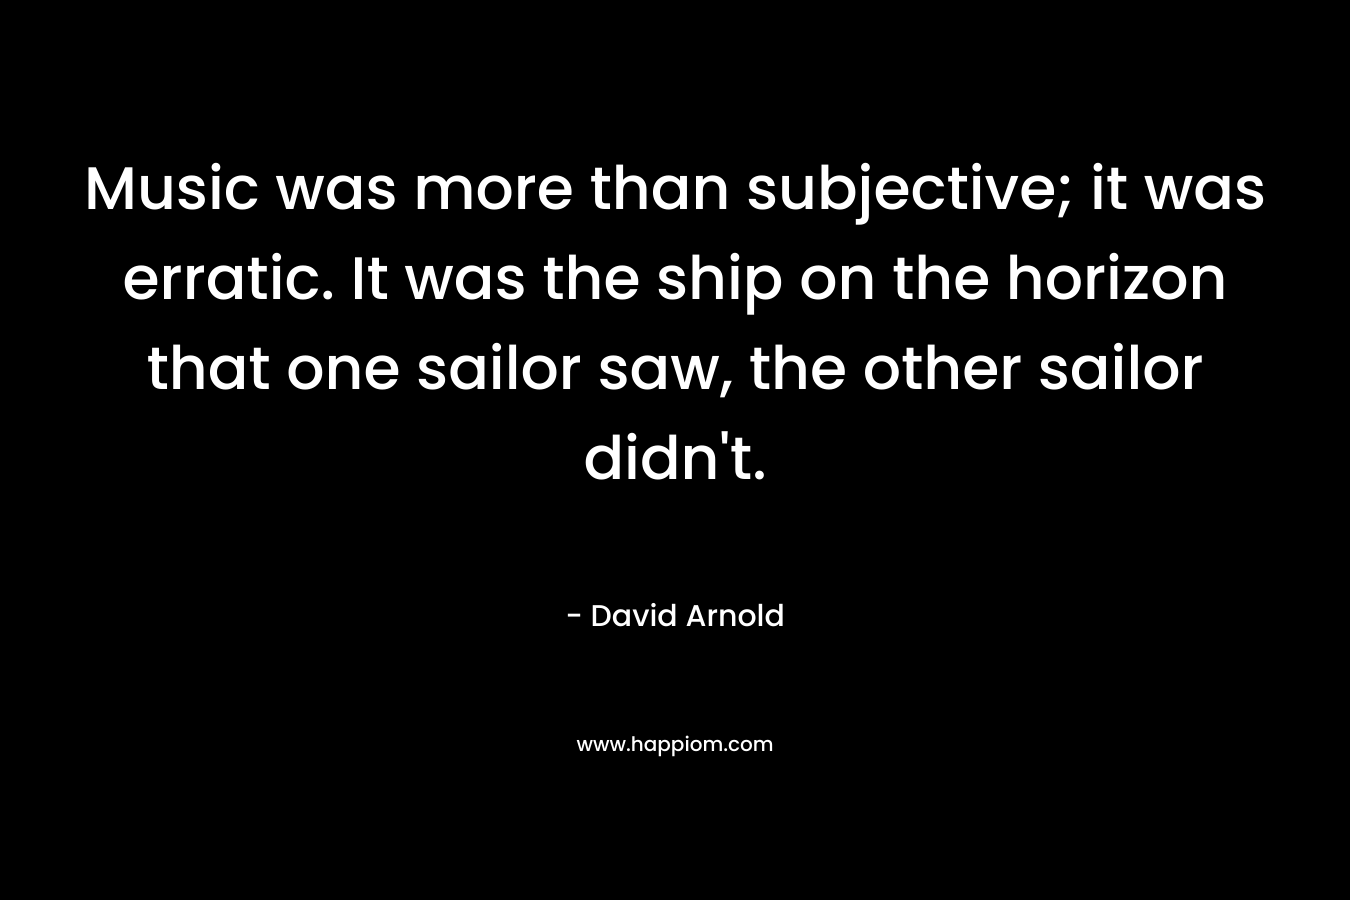 Music was more than subjective; it was erratic. It was the ship on the horizon that one sailor saw, the other sailor didn't.